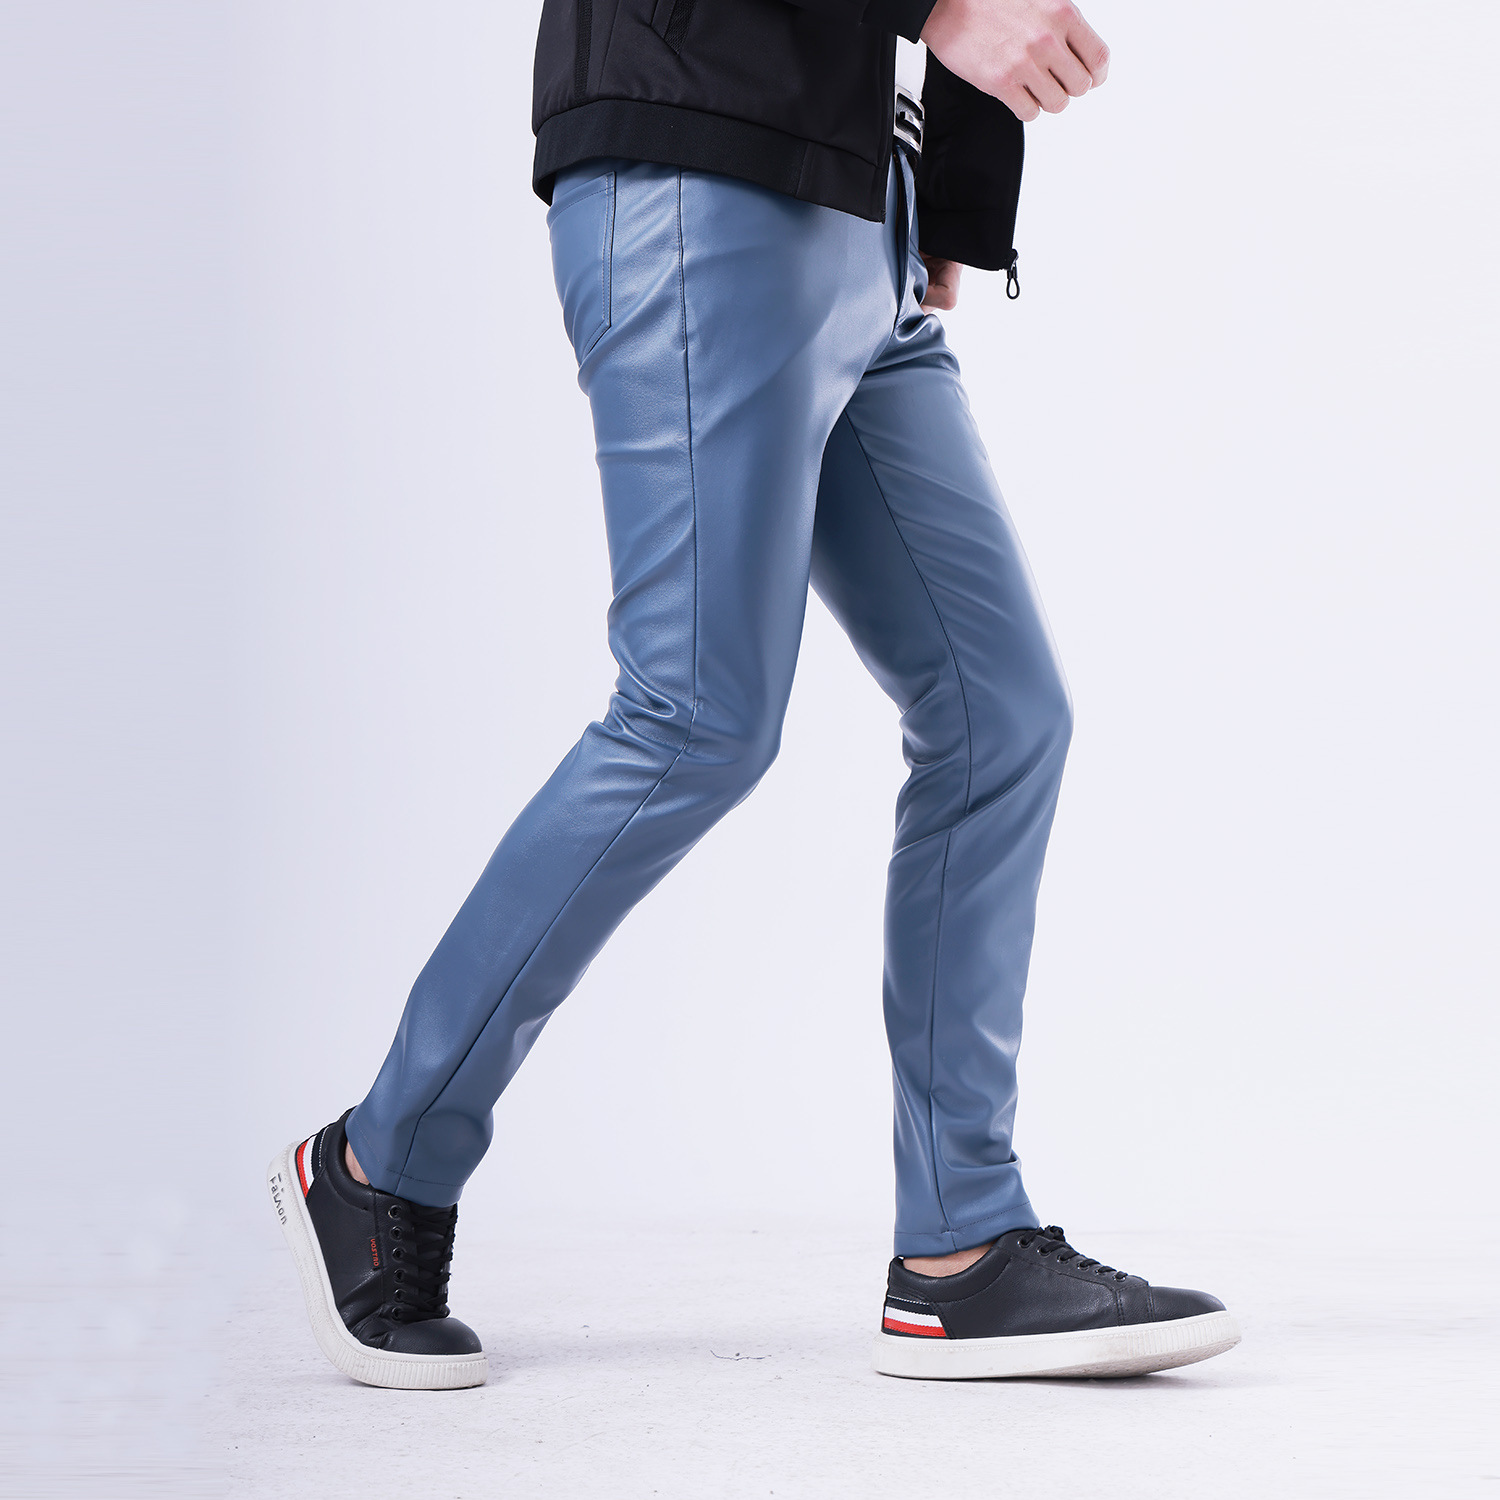 🔥BUY 2 GET 1 FREE(Add 3 pcs to cart)_Men's elastic slim fit fashionable colorful leather pants